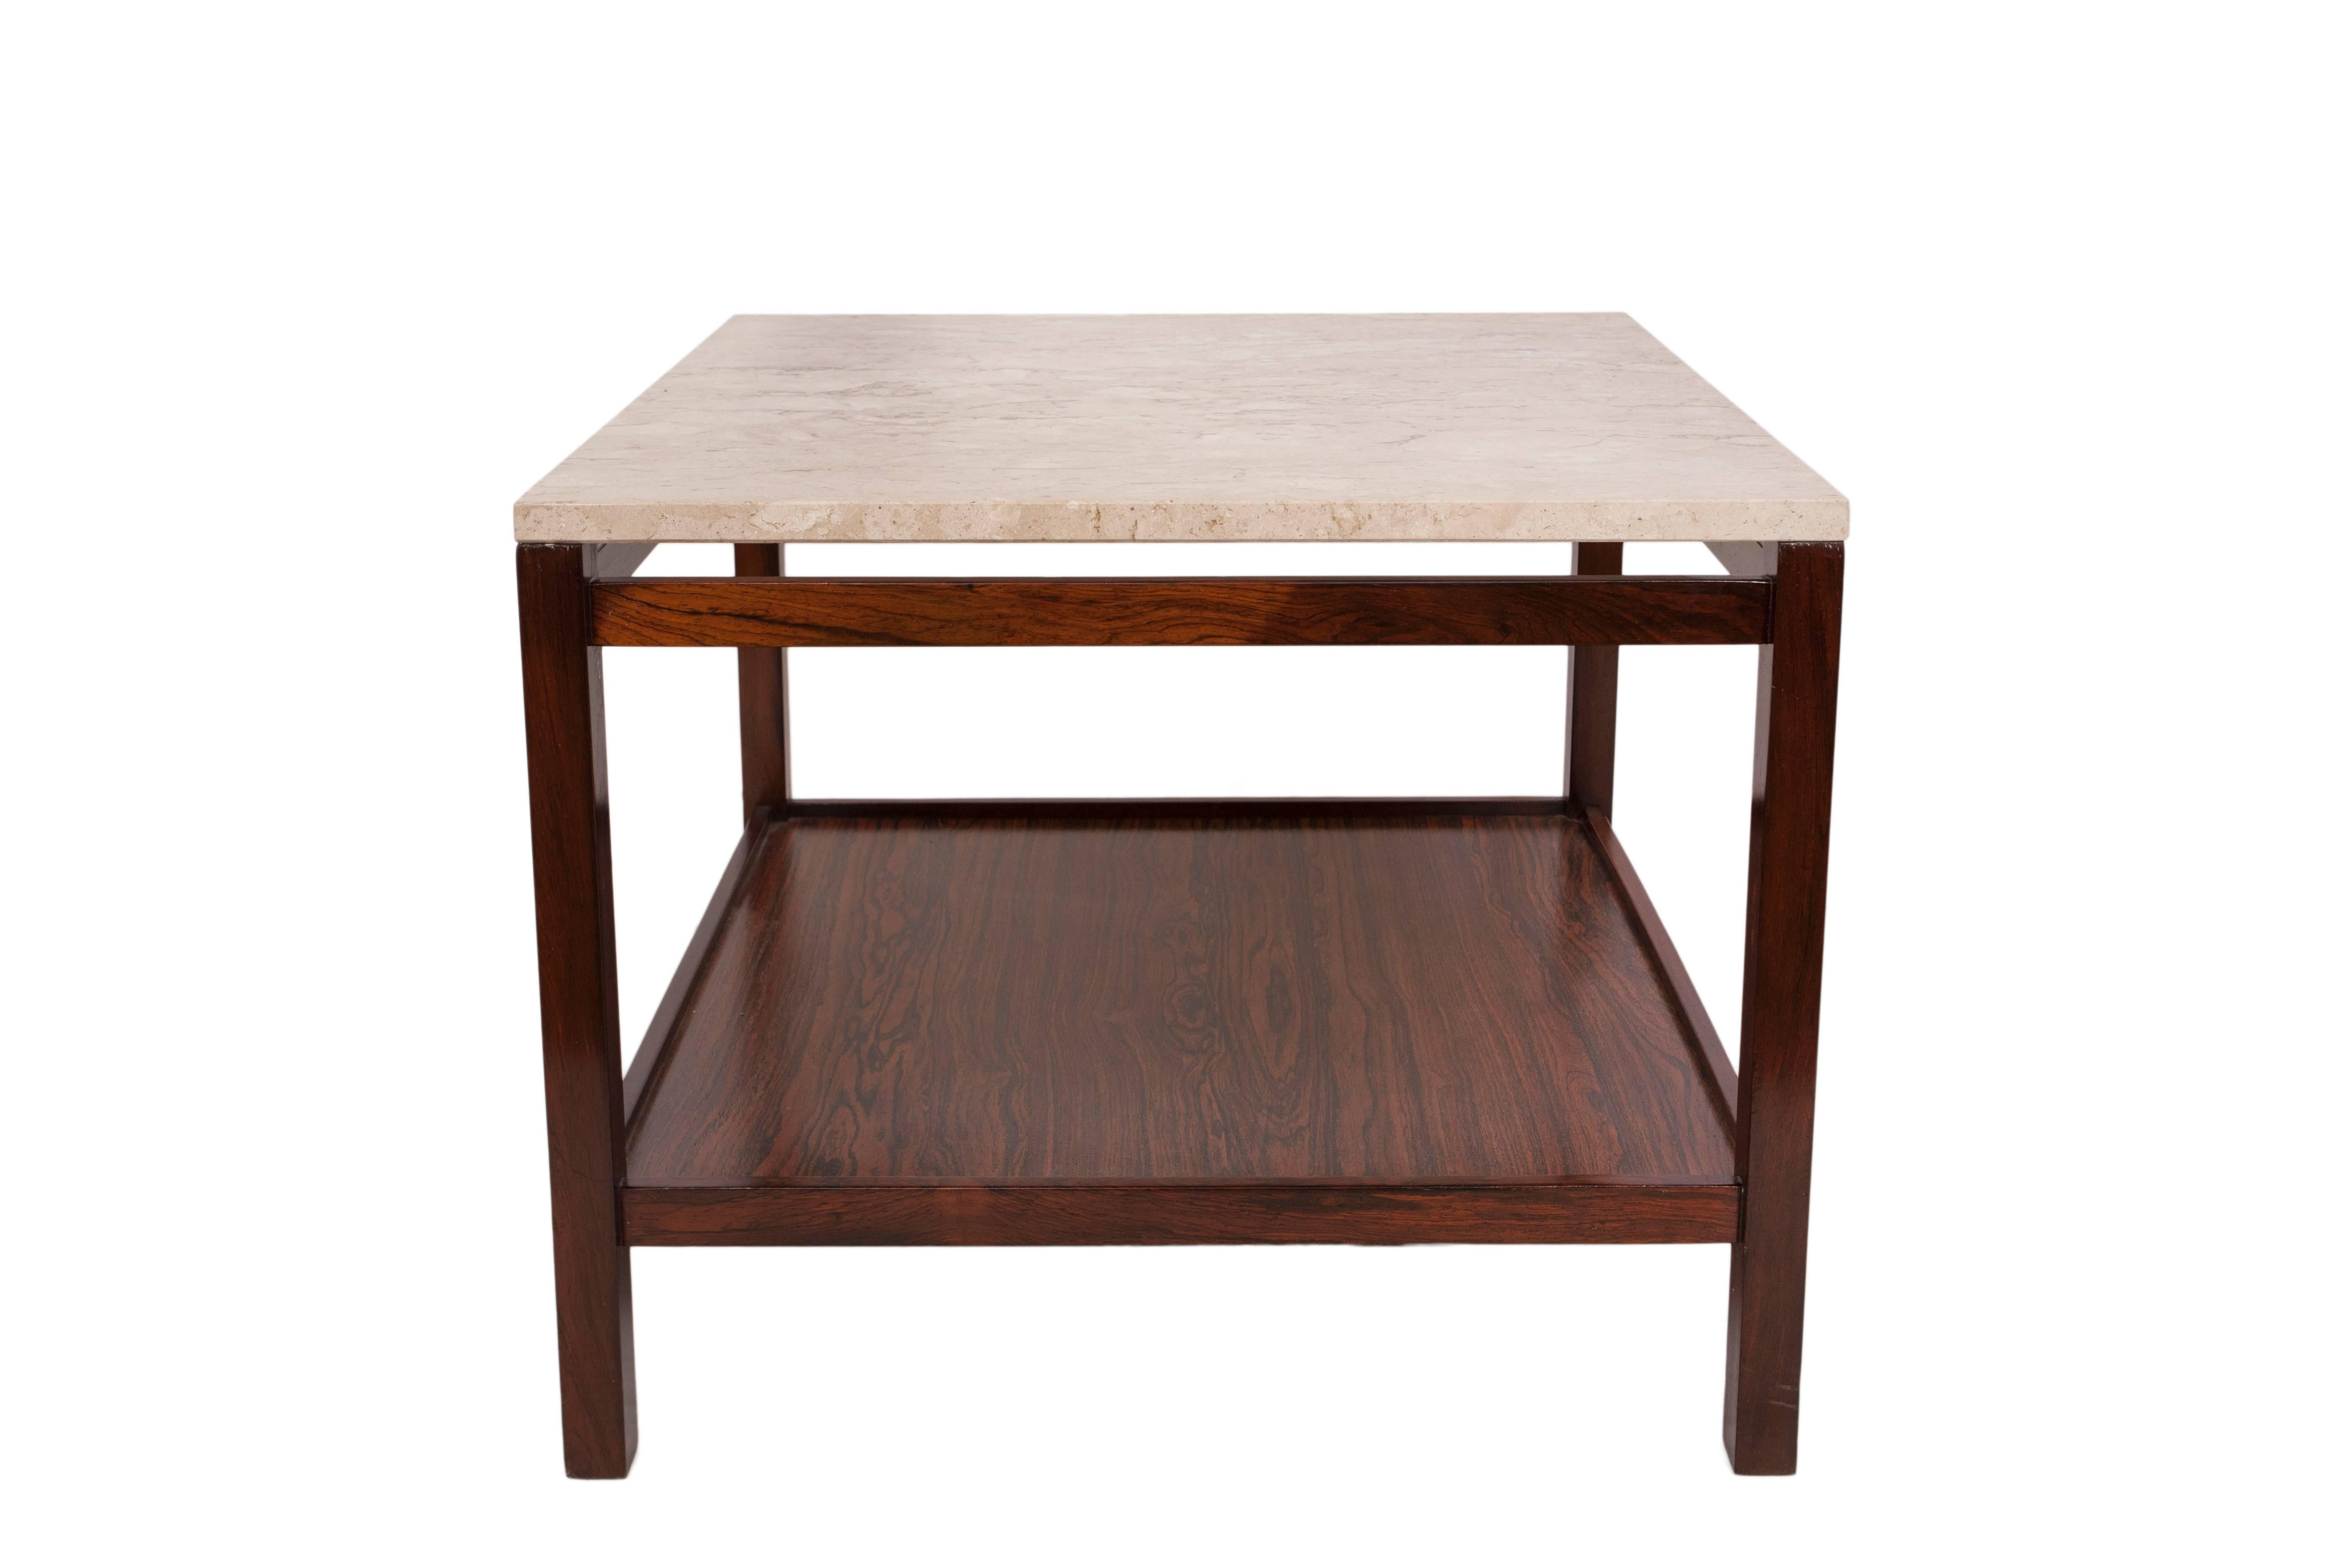 A modernist, circa 1960s side table, with marble top on rectilinear base in Brazilian jacarandá wood with lower shelf. This table remains in very good vintage condition, consistent with age and use.